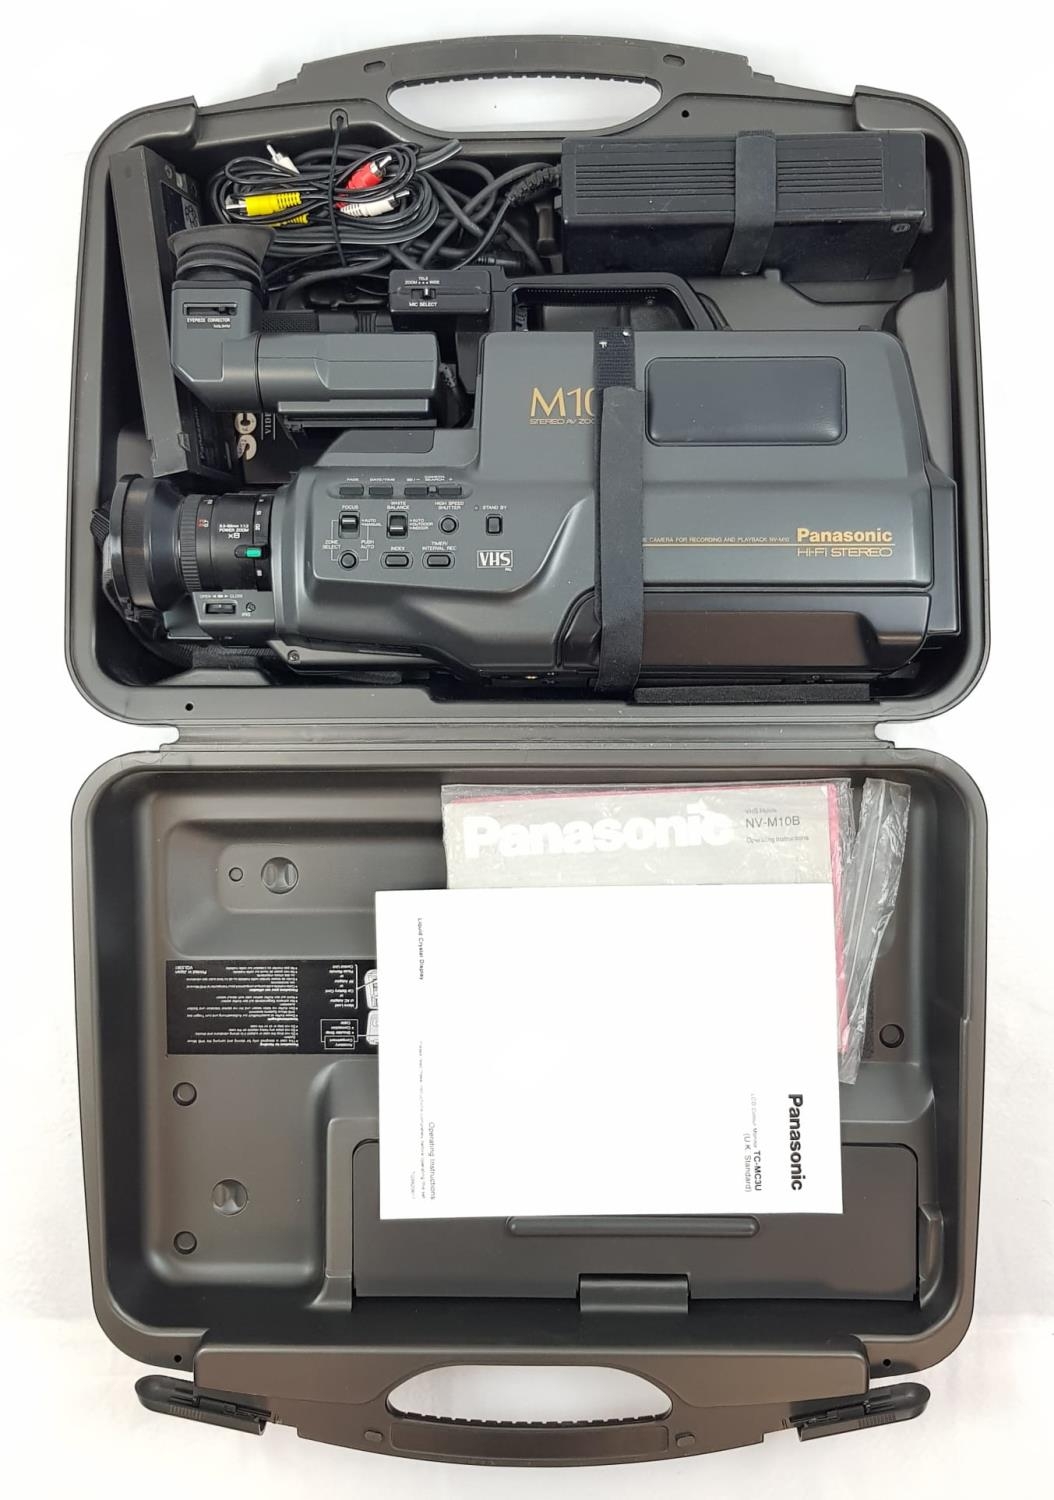 A Panasonic NV-M10 Camcorder. Comes with battery pack, cables and instructions - in original case. - Image 26 of 28